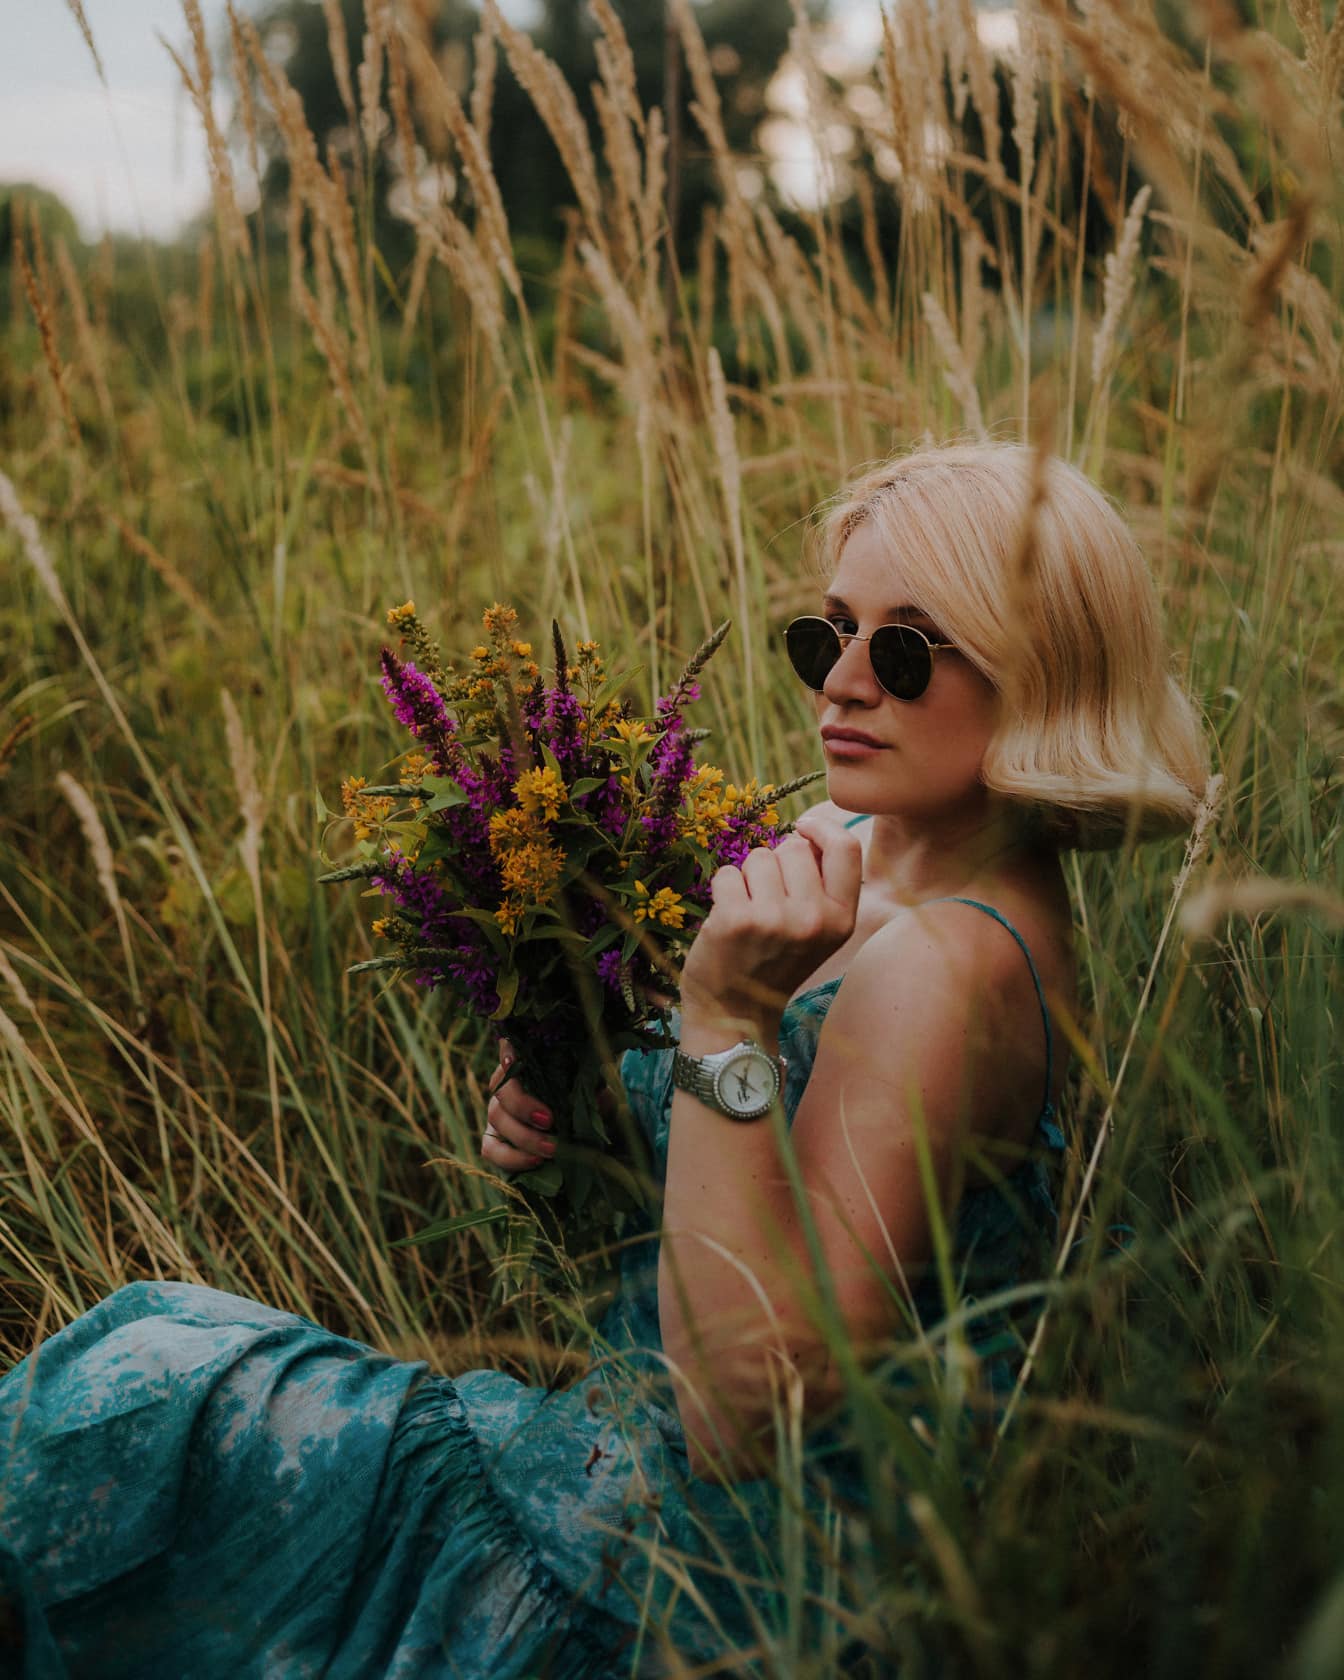 Gorgeous blonde in grass with bouquet of flowers